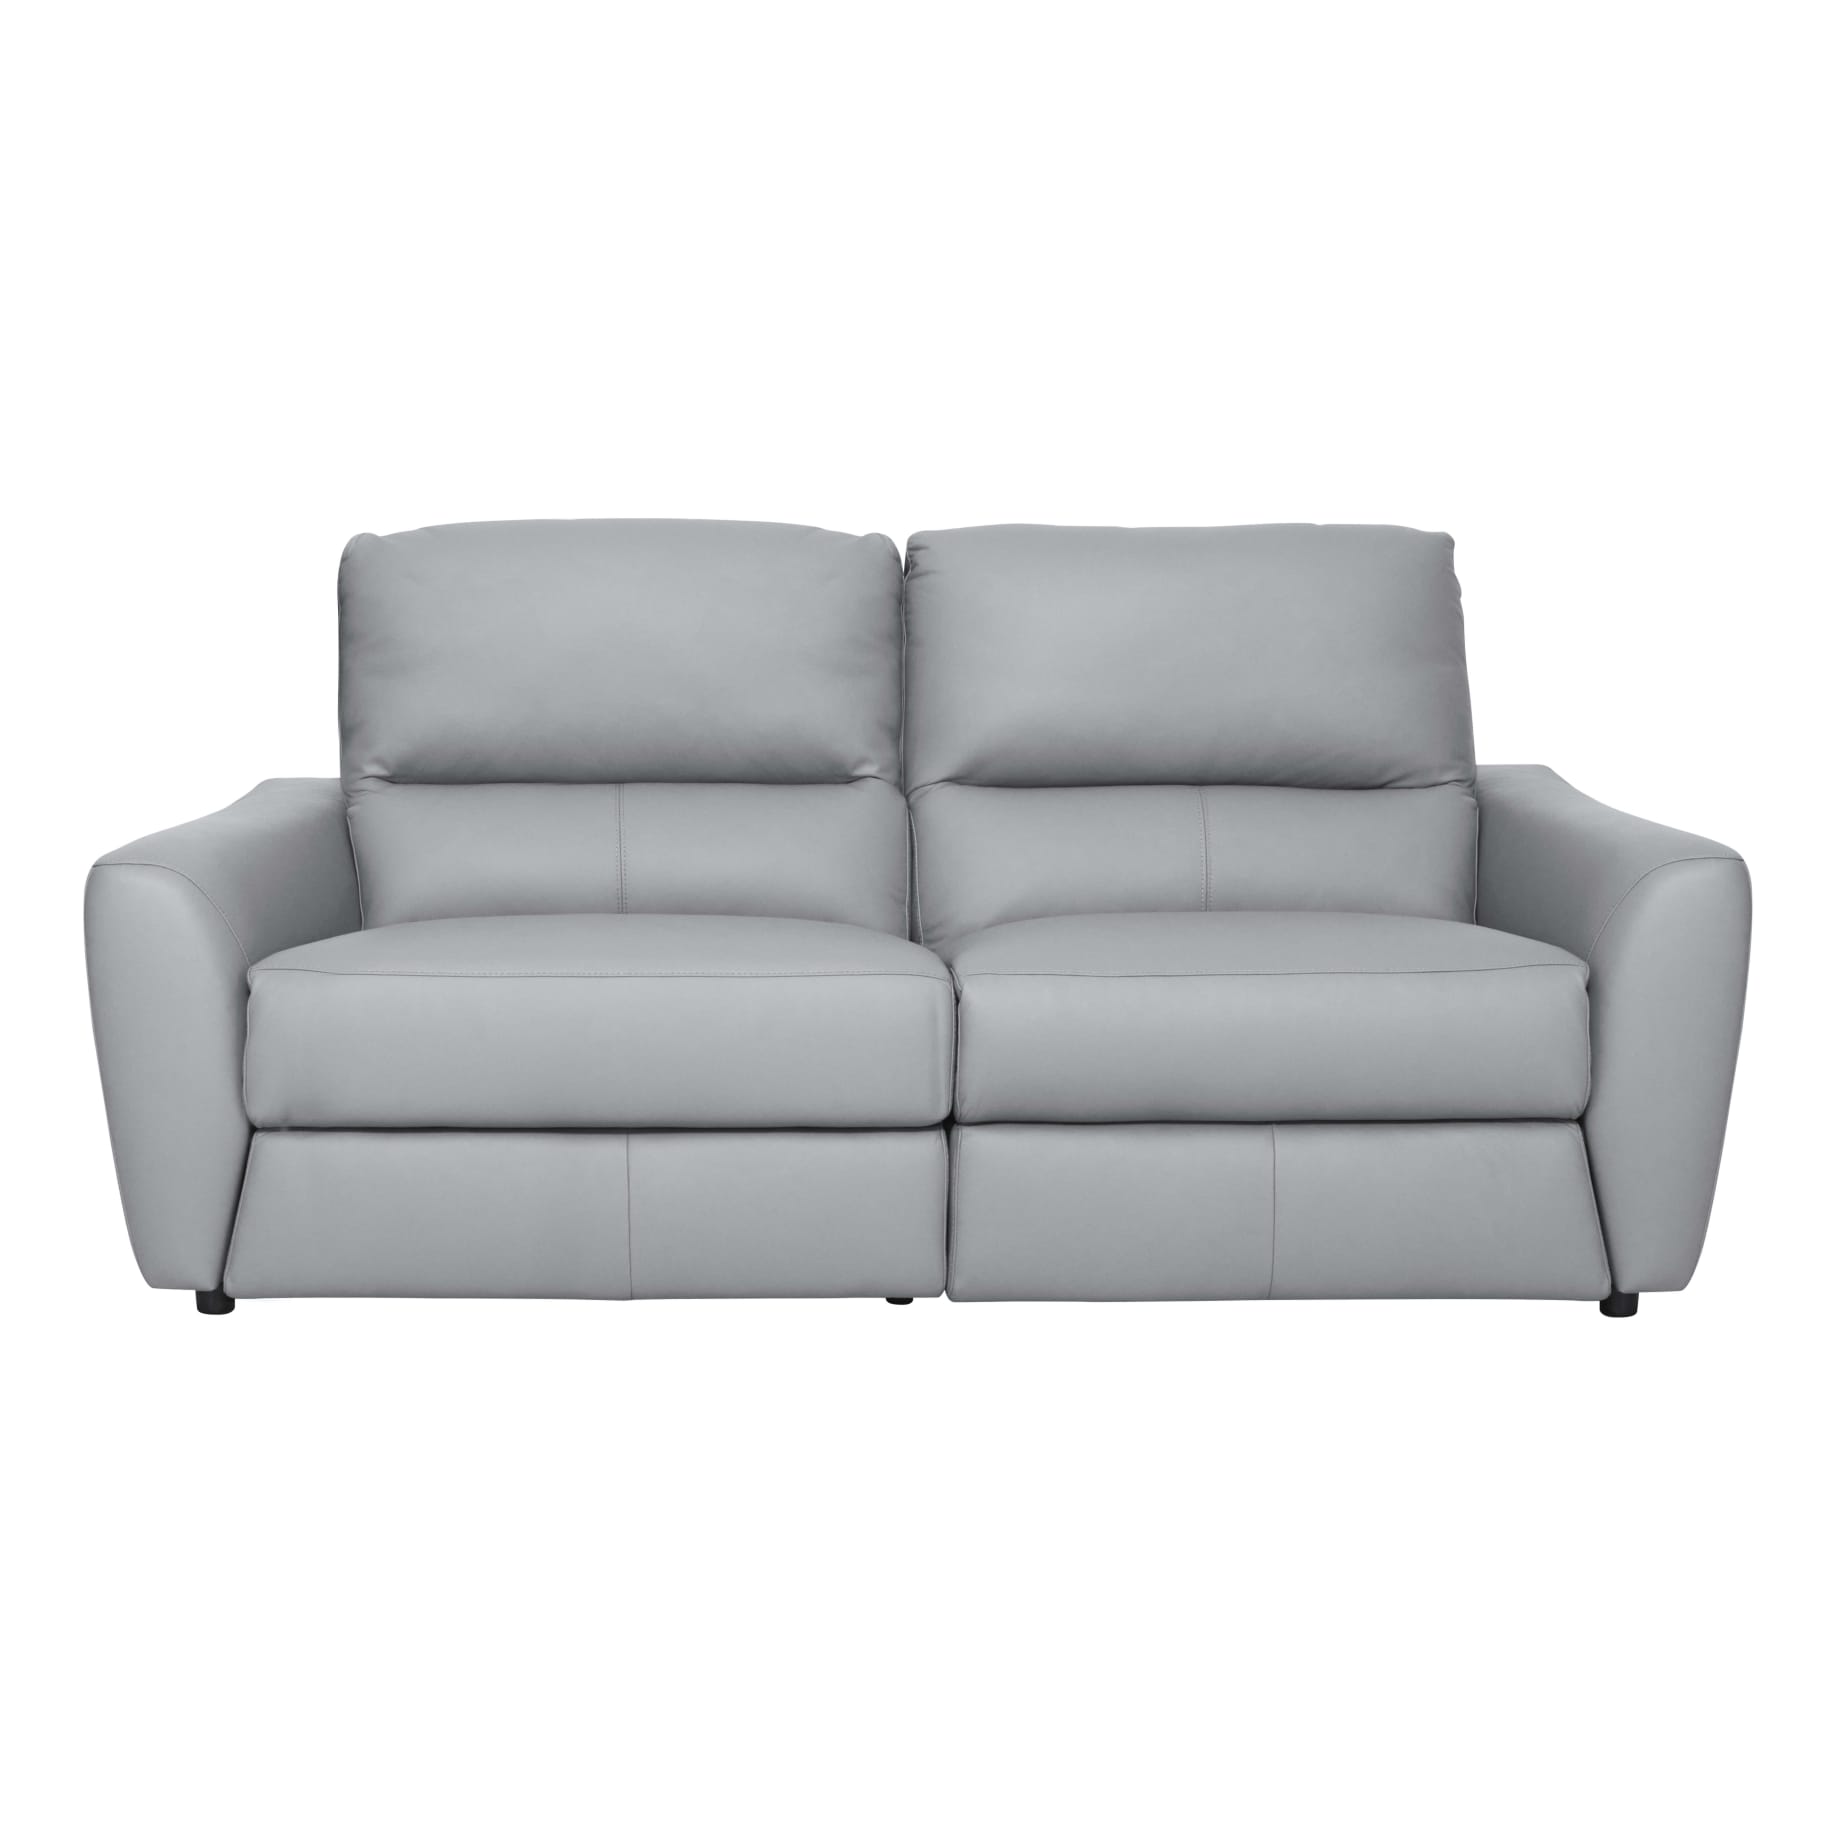 Portland 2 Seater Recliner Sofa  in Leather Pewter